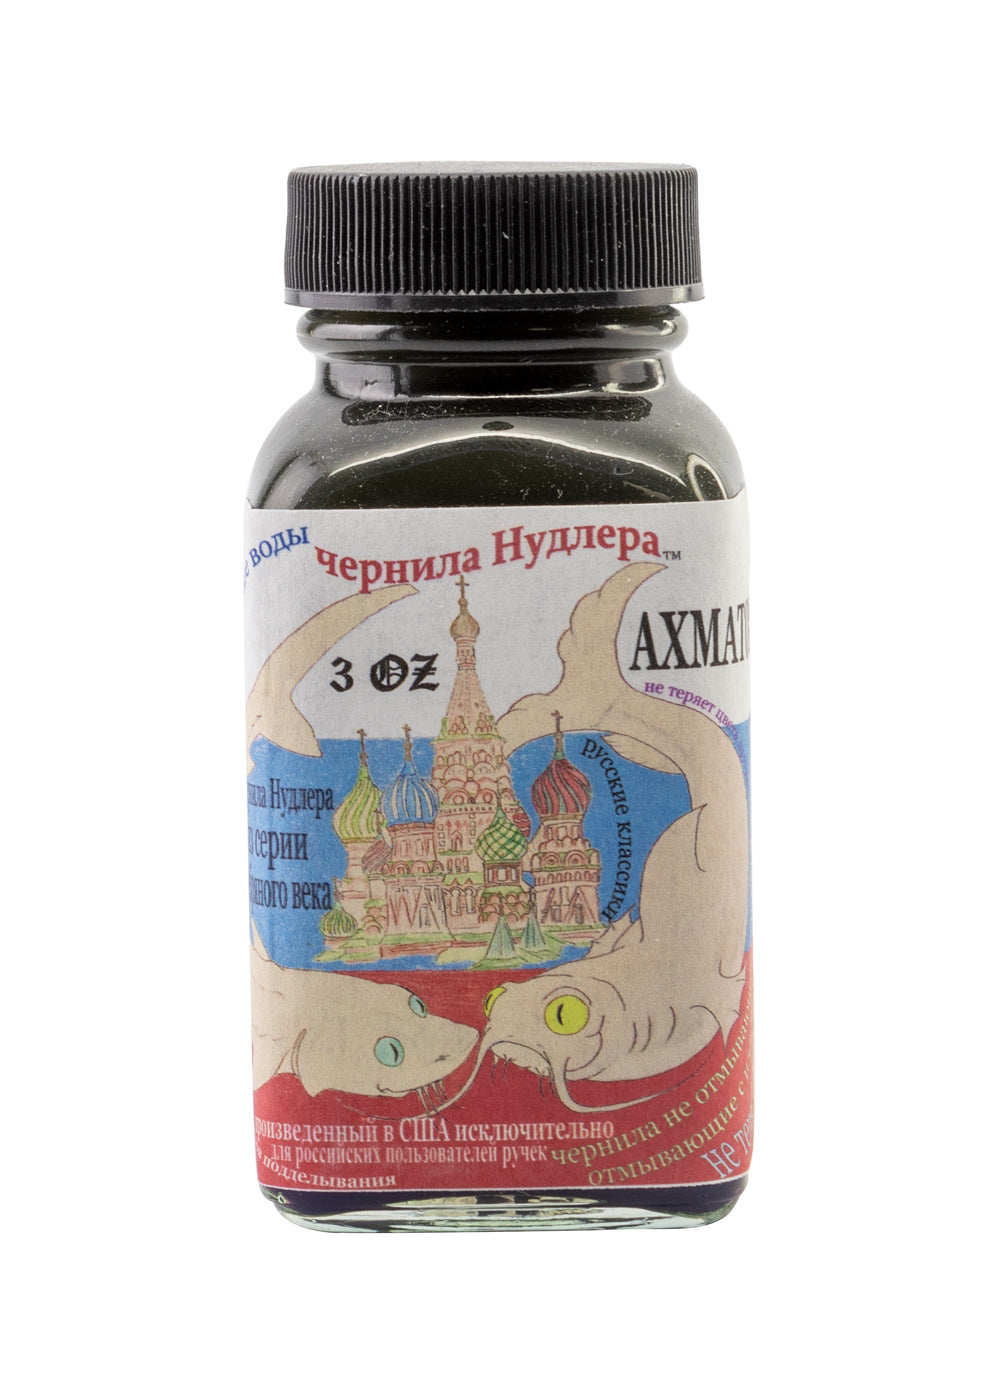 Noodler's AKmatova - is a Dark Green Ink that is bullet proof  at is resistant to UV, Bleach, Alcohol. this Ink is also forgery and water resistant, and will not fade under florescent lights